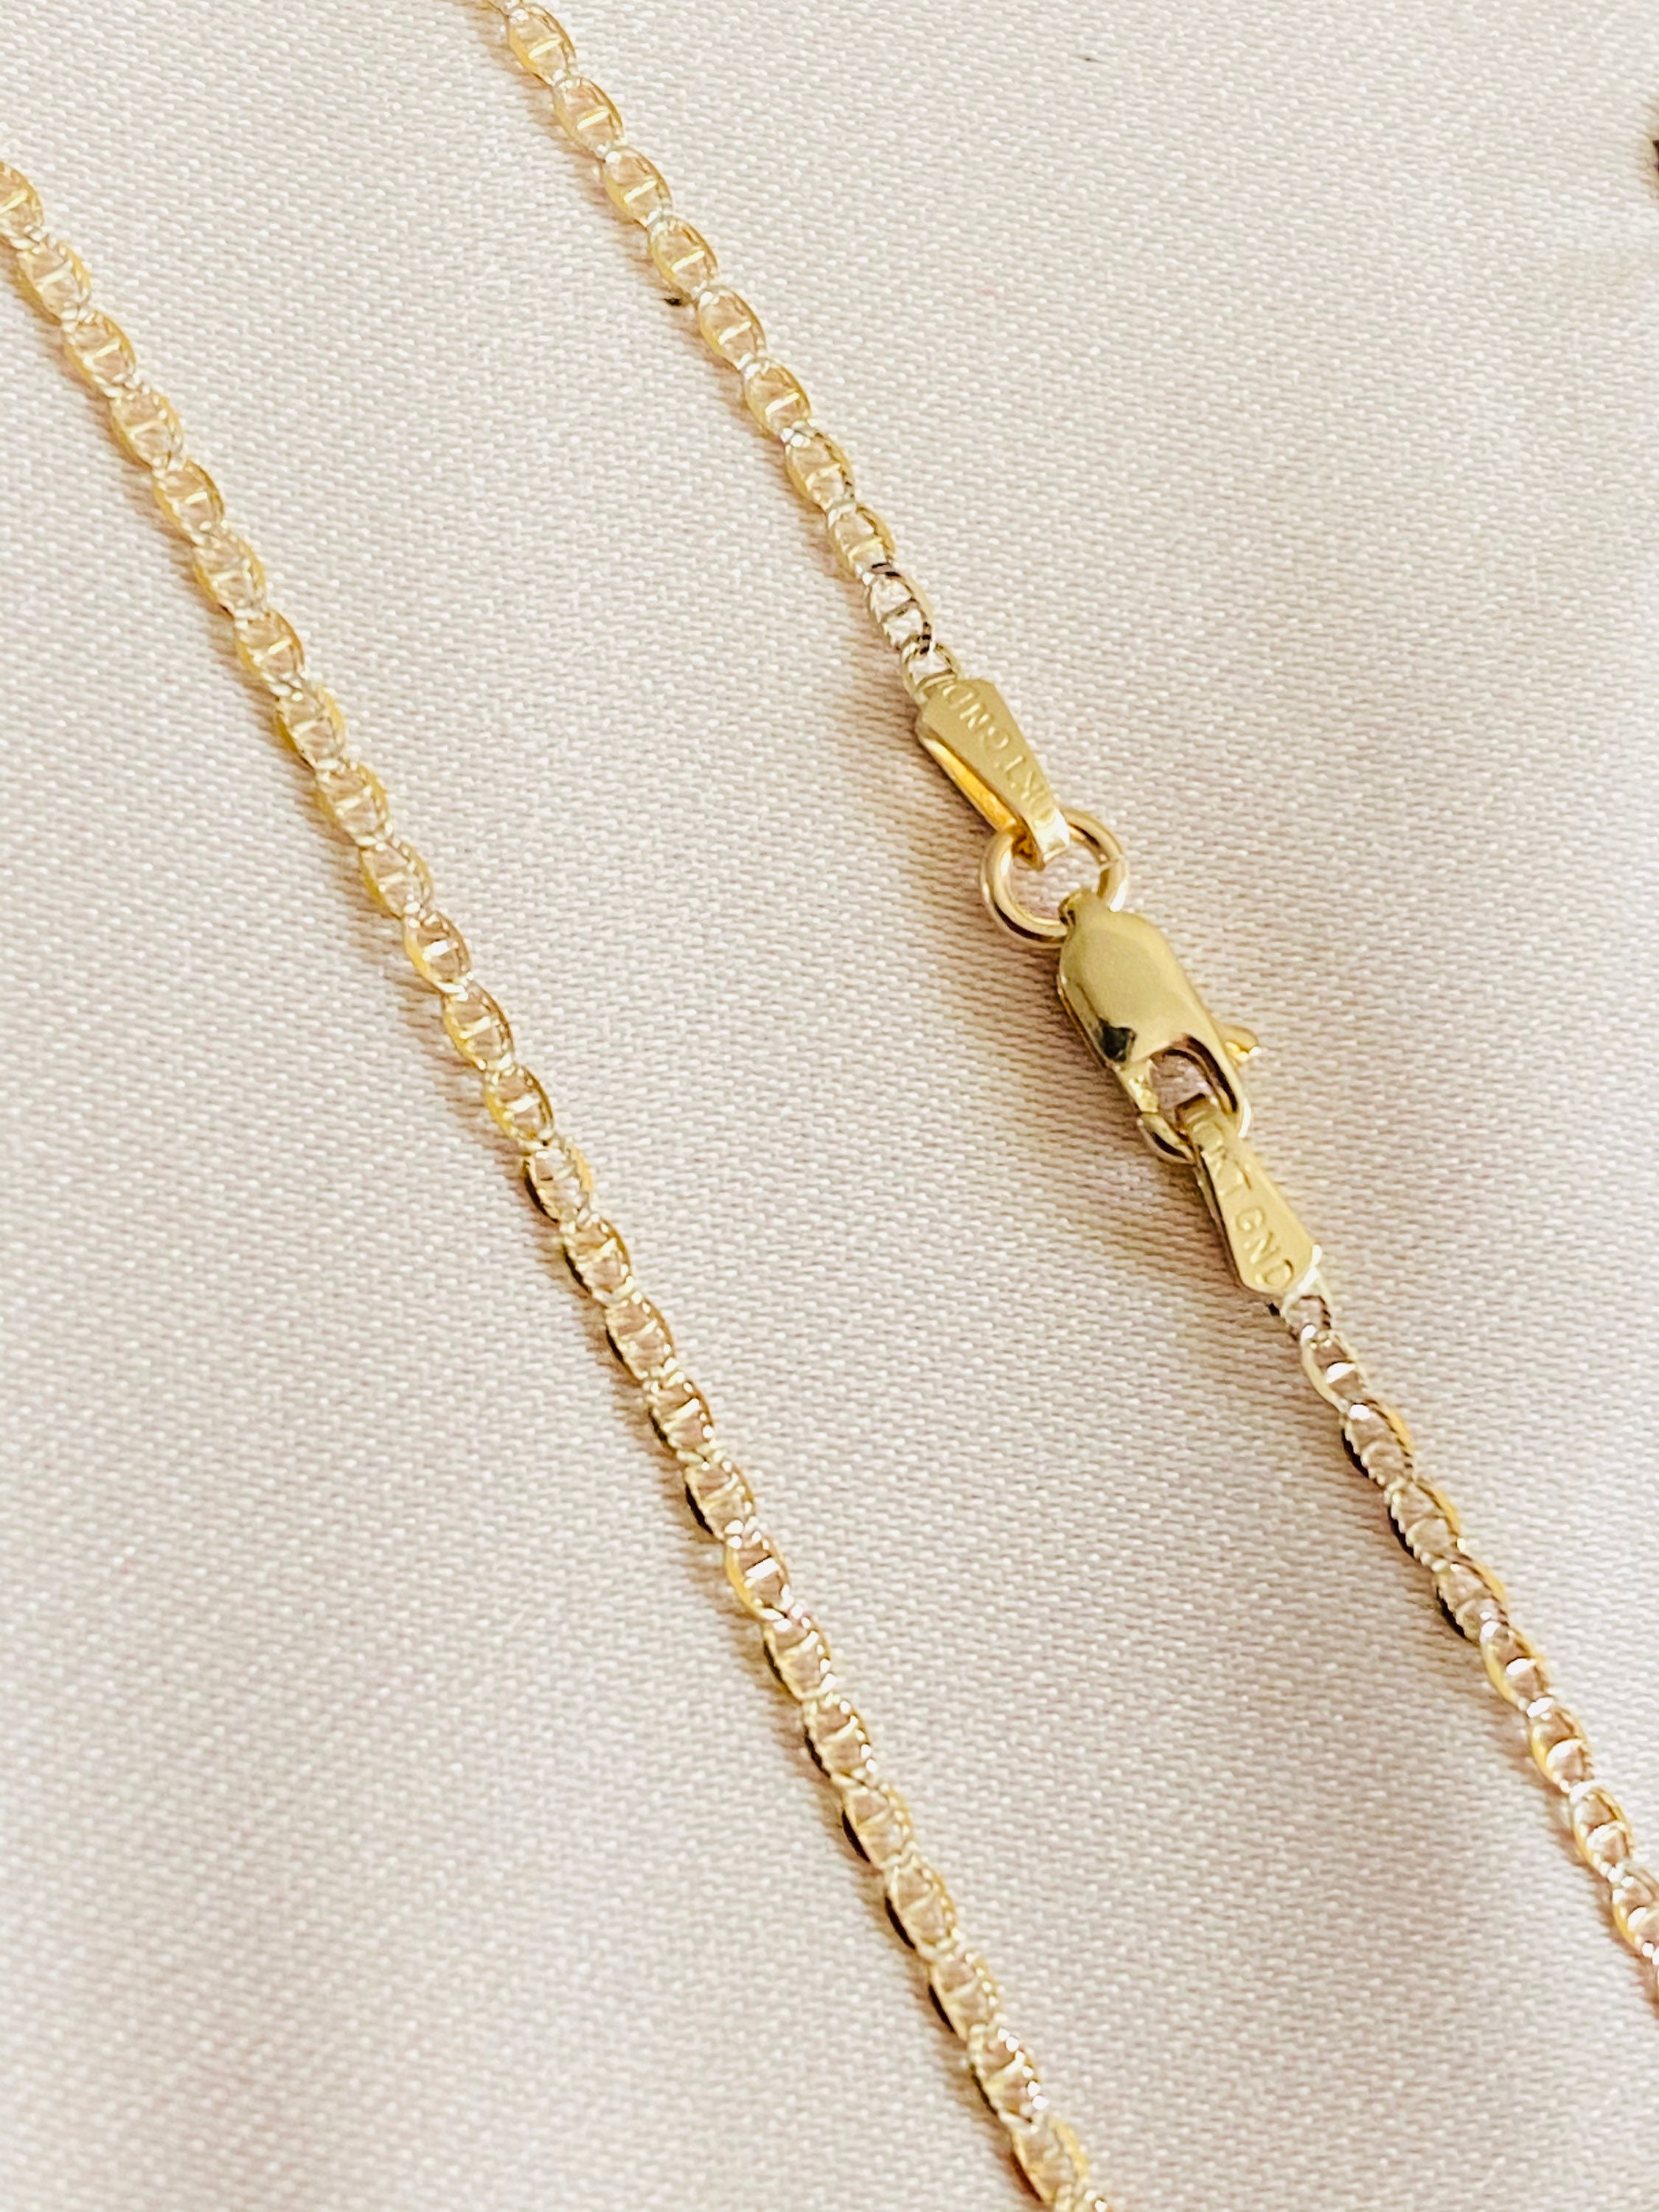 Solid 10K Gold Shiny Diacut Mariner Box Rope Chain Necklace -  Sweden